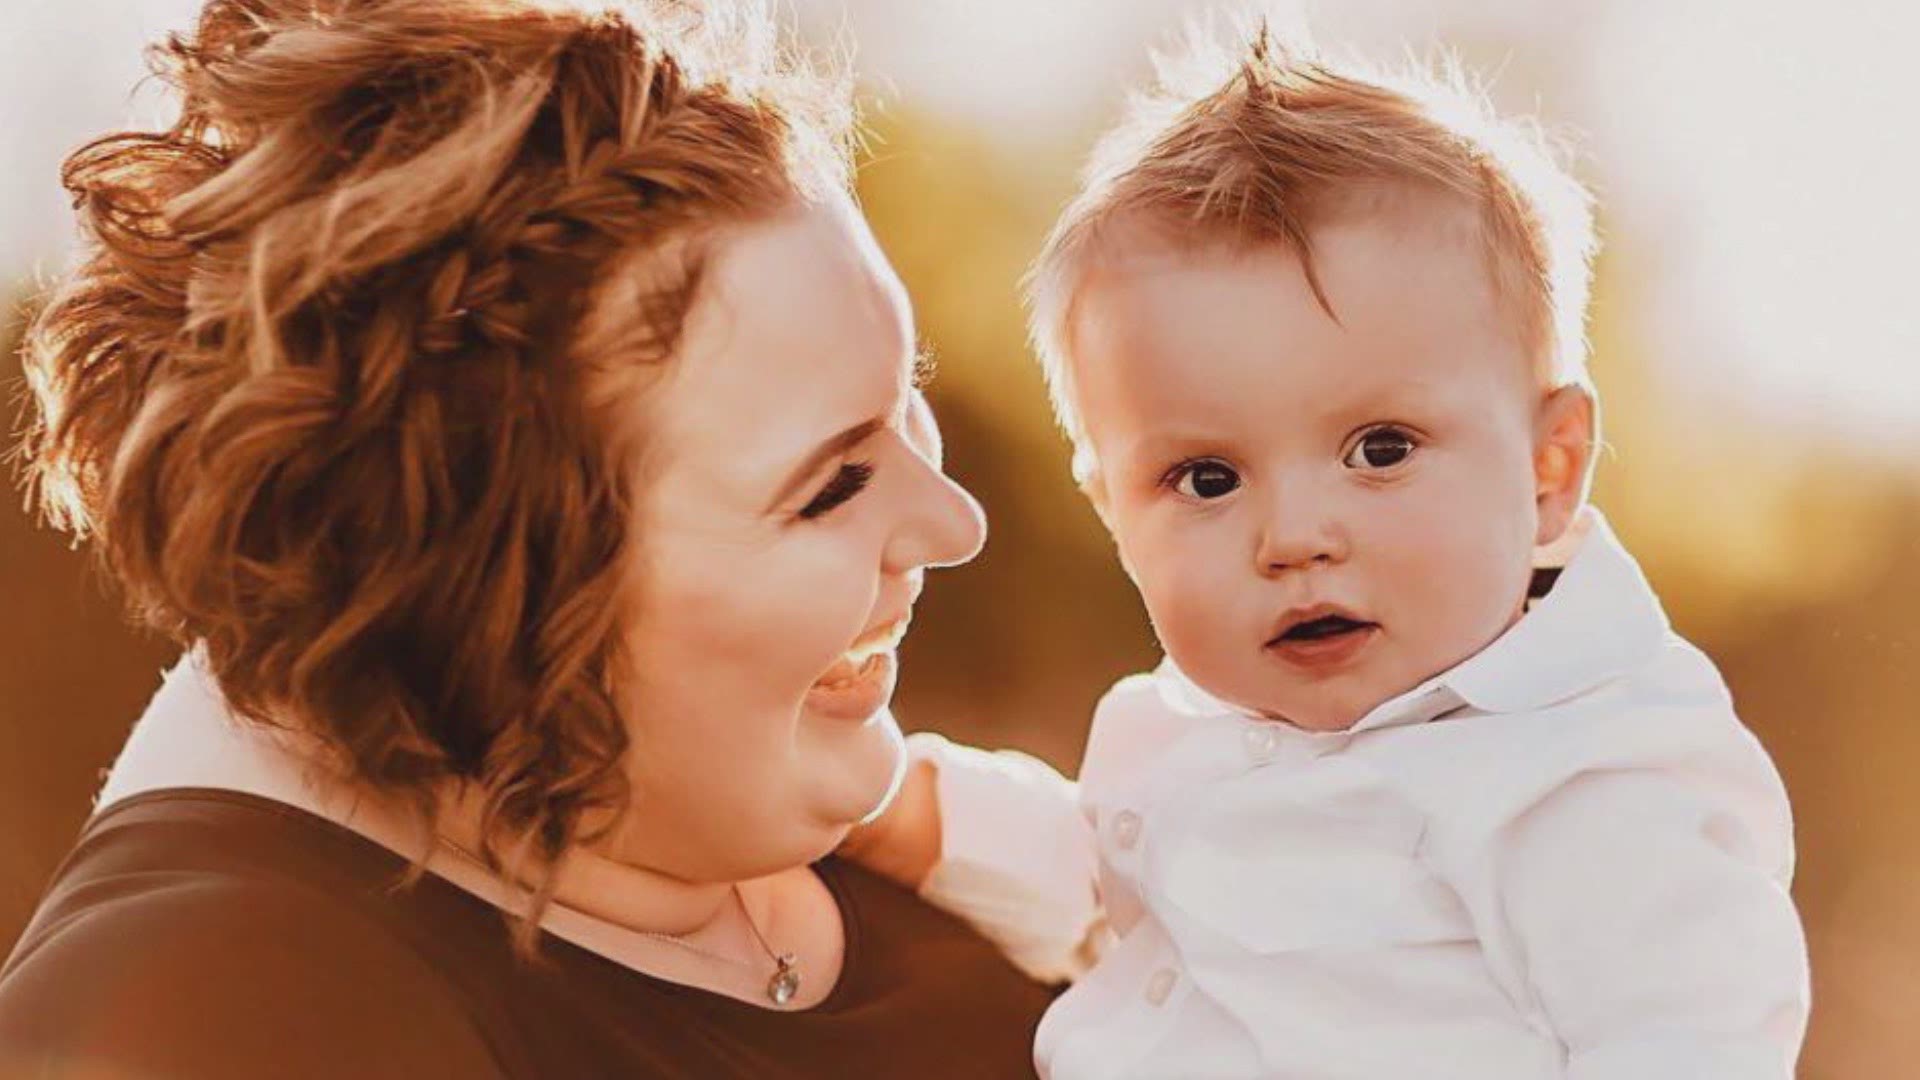 Hair loss is a topic that women don’t like to talk about. Especially if it’s happening due to bringing life into this world. One West Texas mom is speaking out about her struggles in hope to help another mothers.